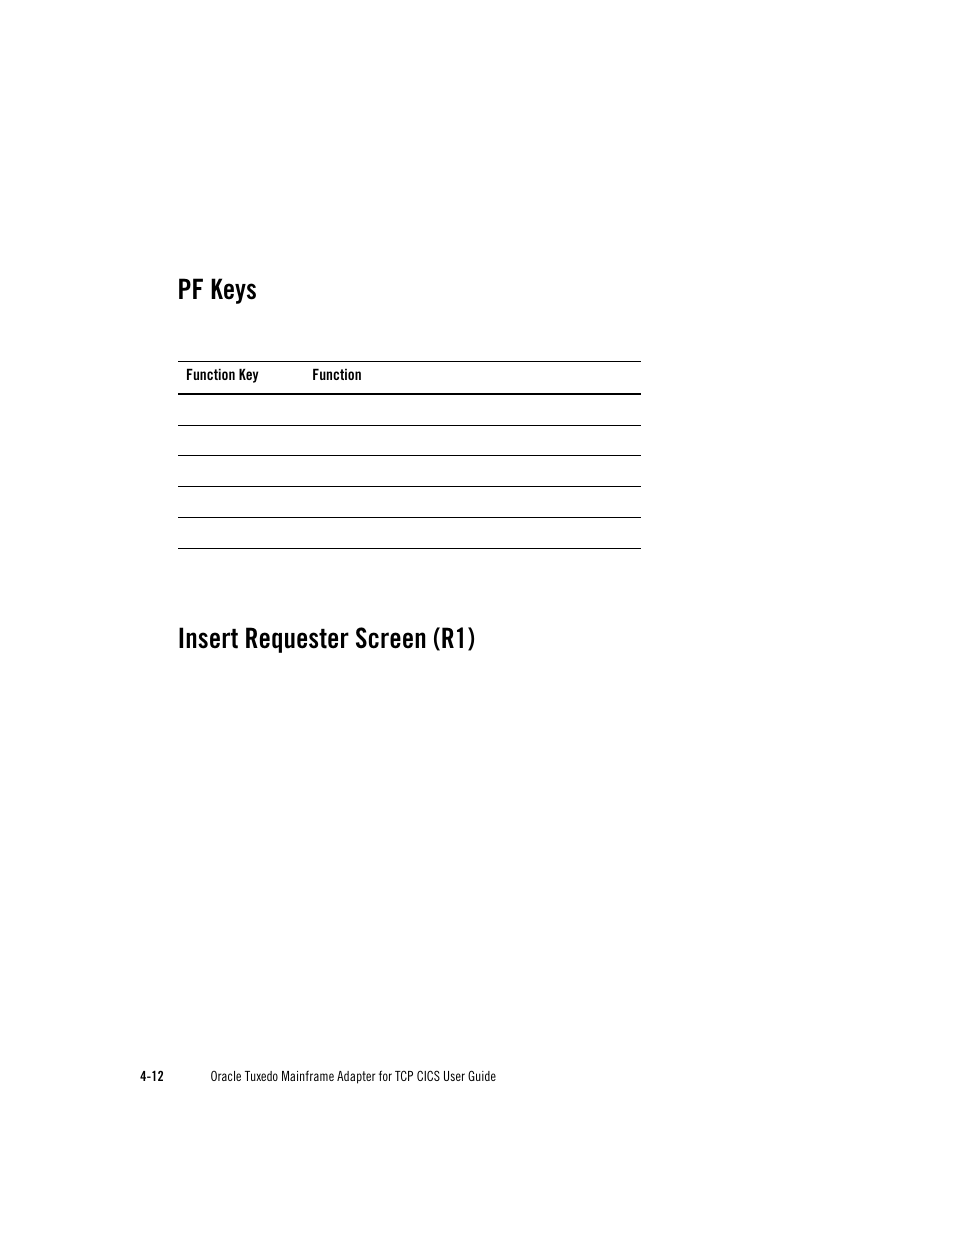 Pf keys, Insert requester screen (r1) | Oracle Audio Technologies Oracle Tuxedo User Manual | Page 46 / 112